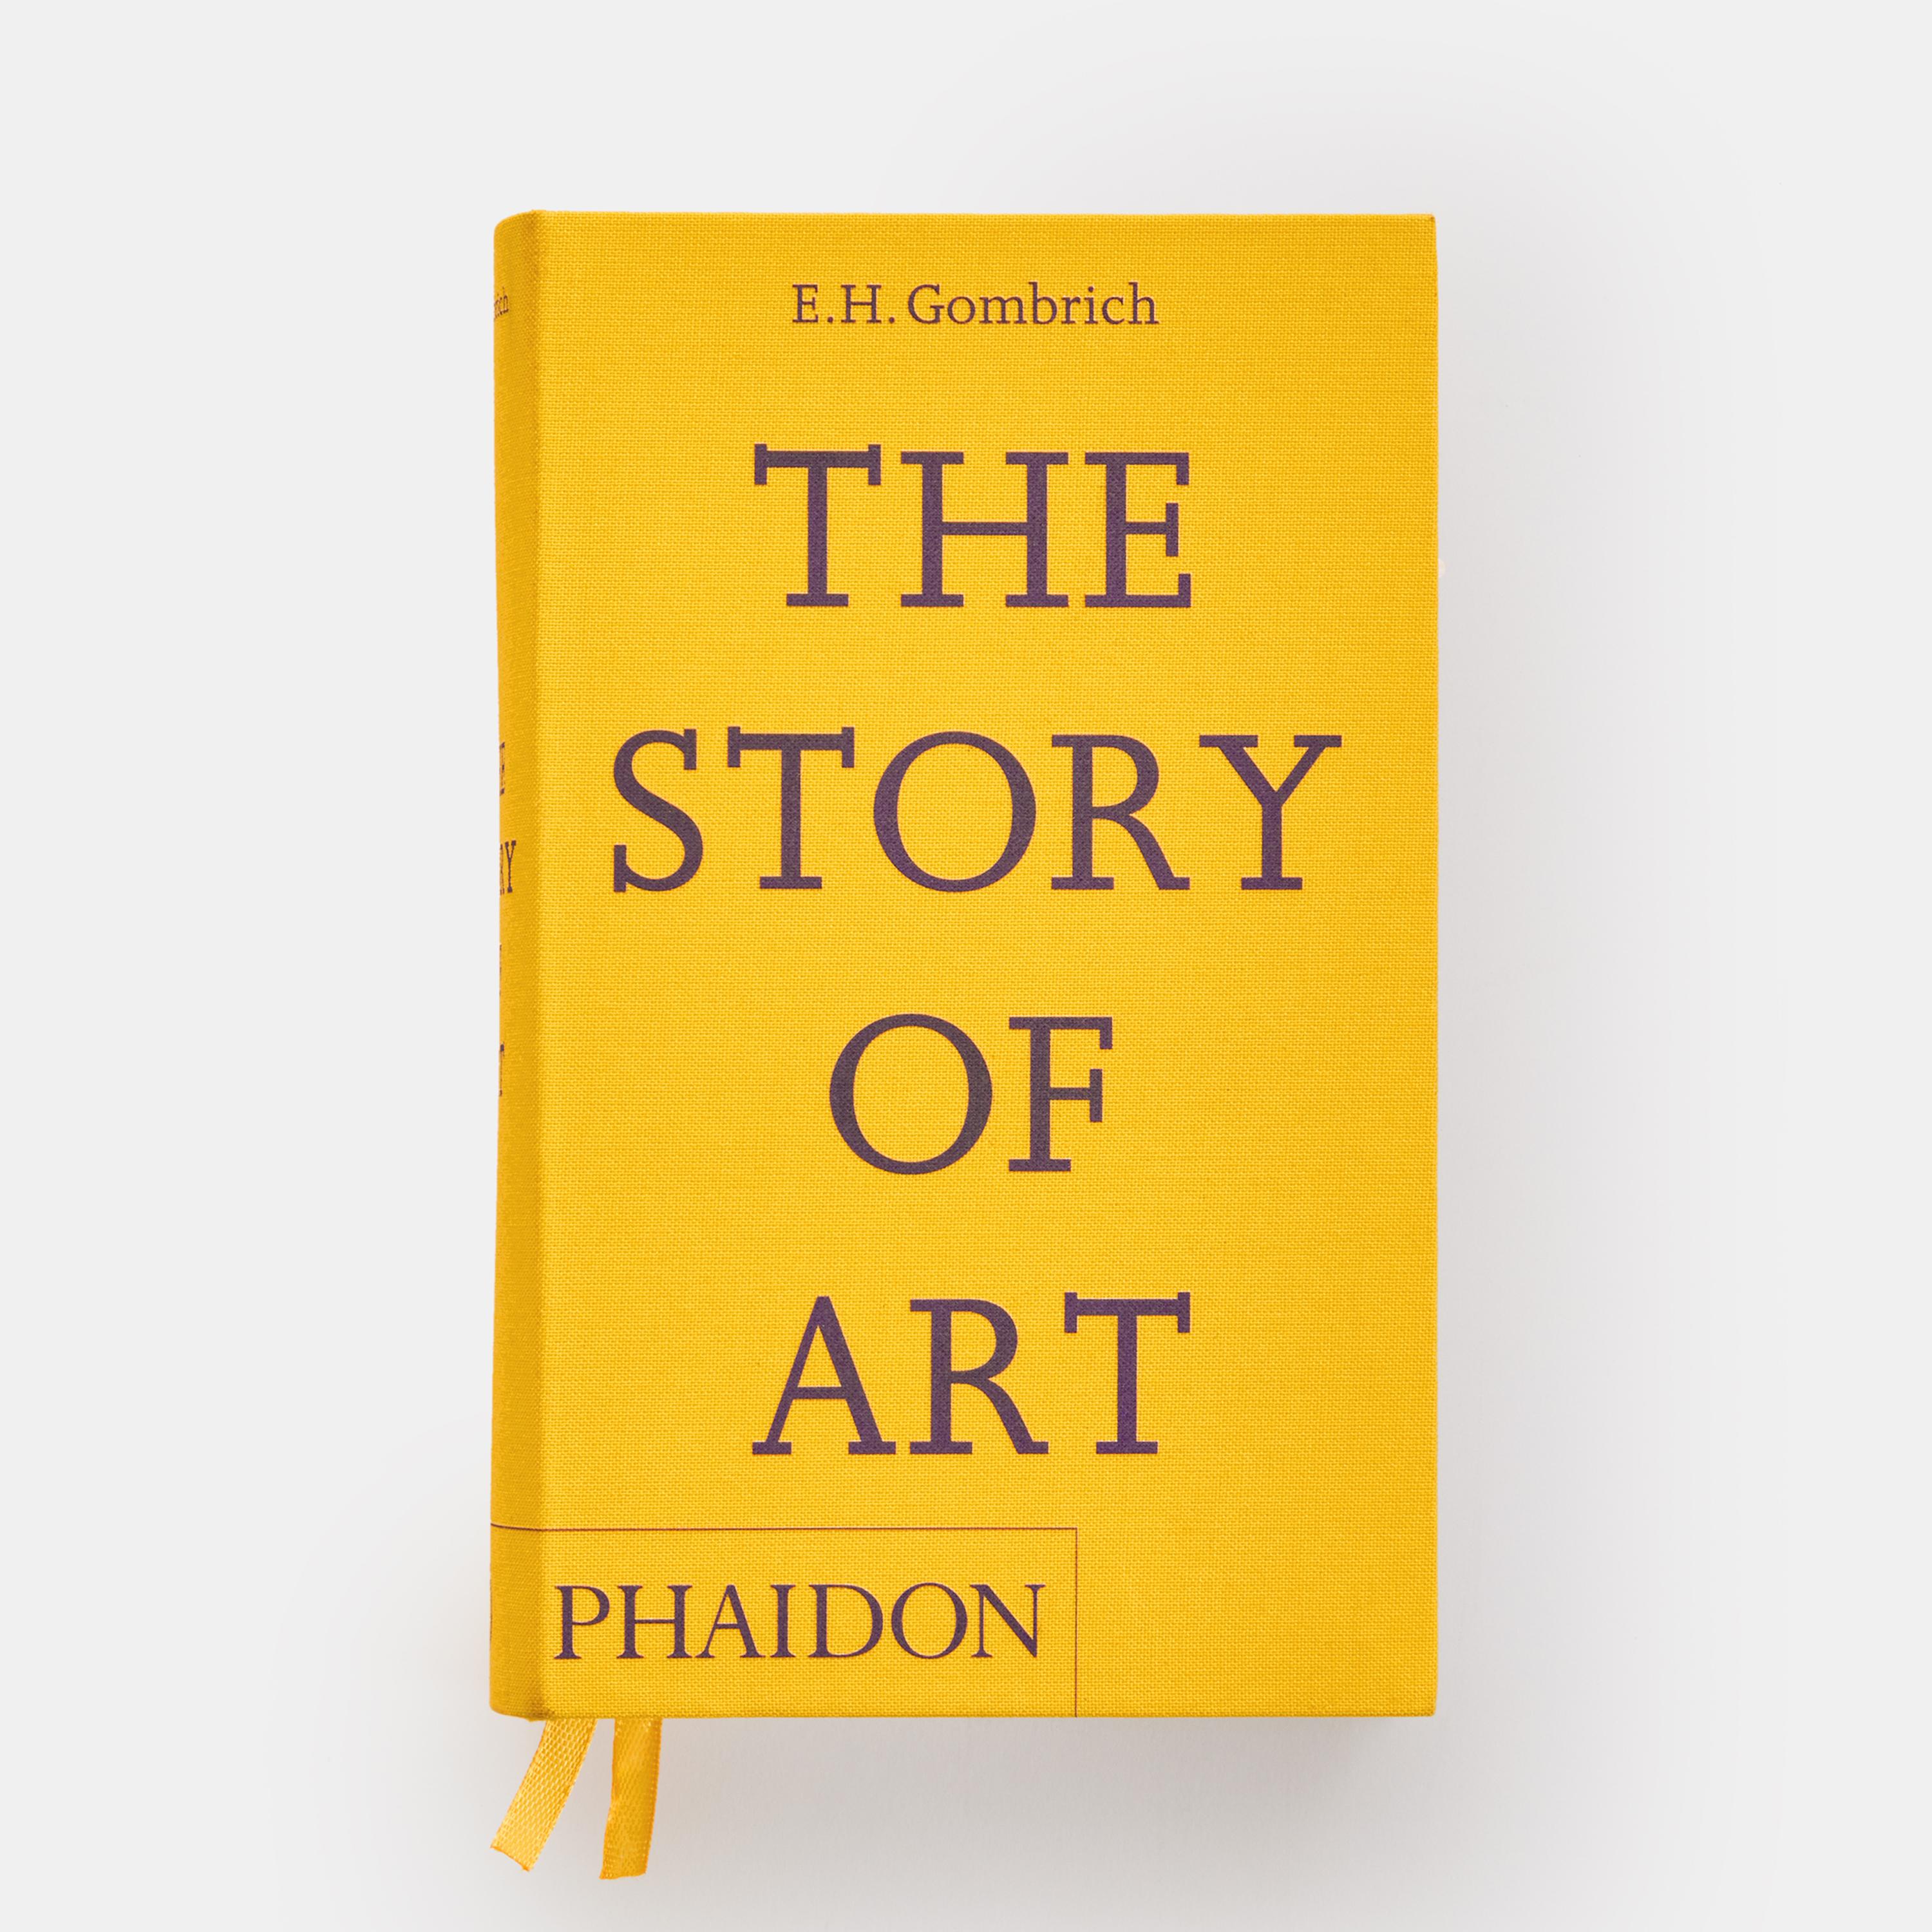 'Anyone looking for the most readable survey of the history of art from the [sic] cave paintings to the 20th century should buy the new, beautifully produced pocket edition of The Story of Art, still one of the great classics of art criticism.' –